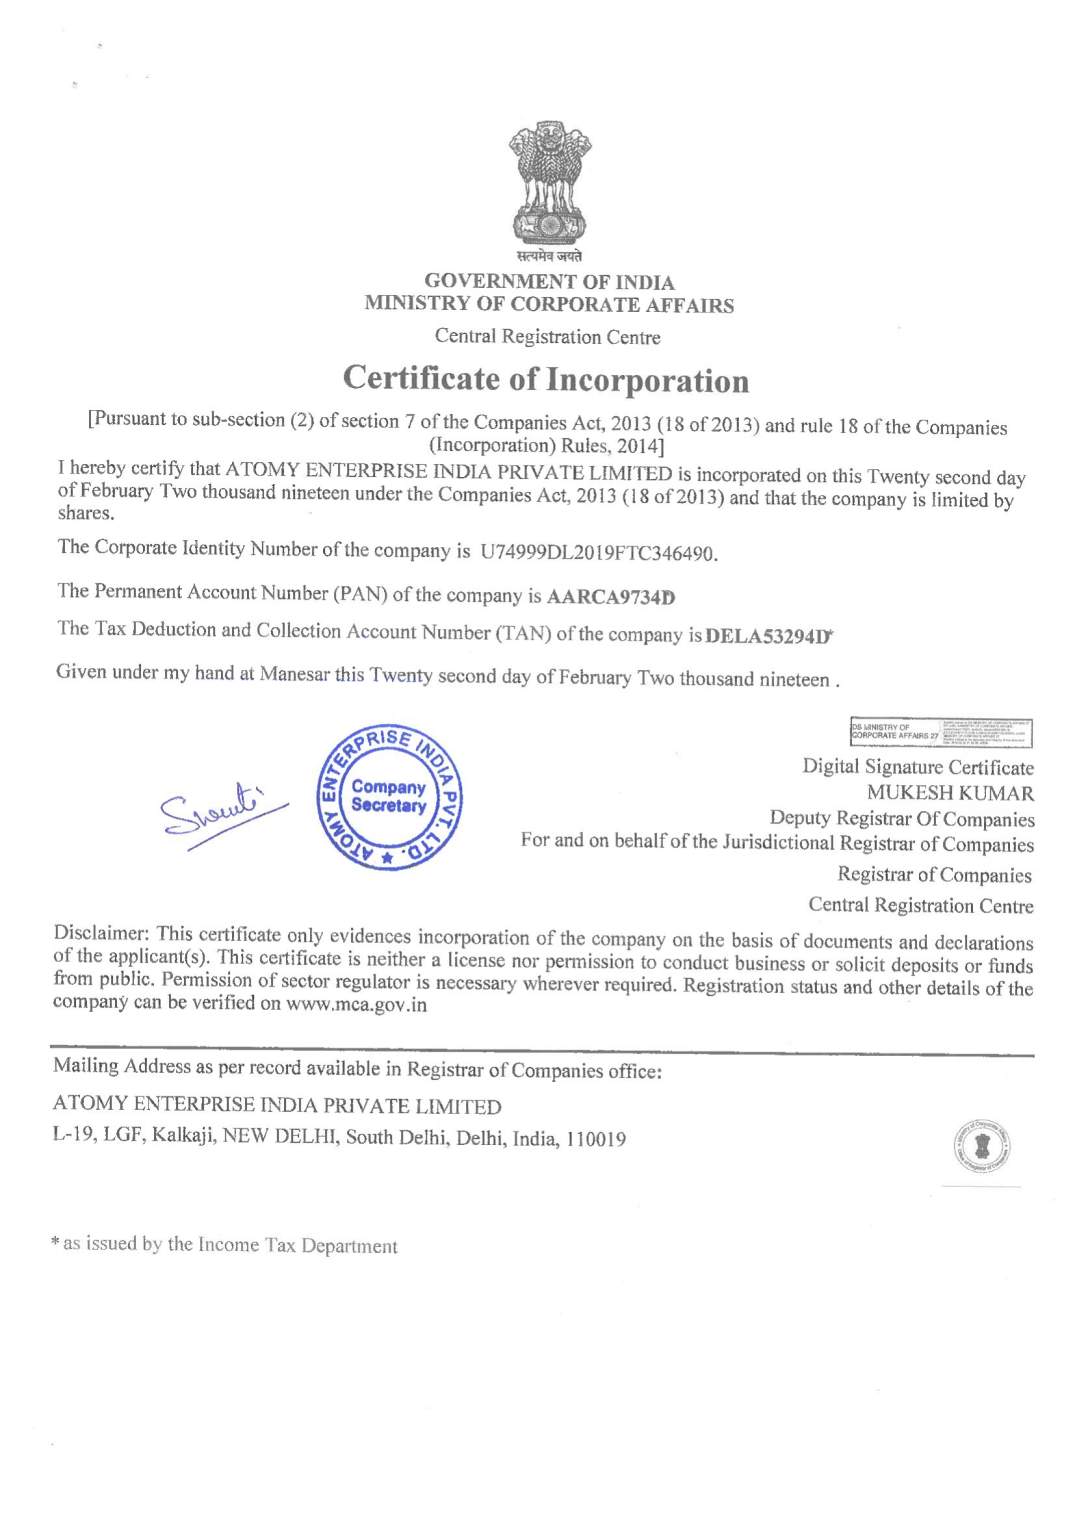 Atomy India Incorpation Certificate